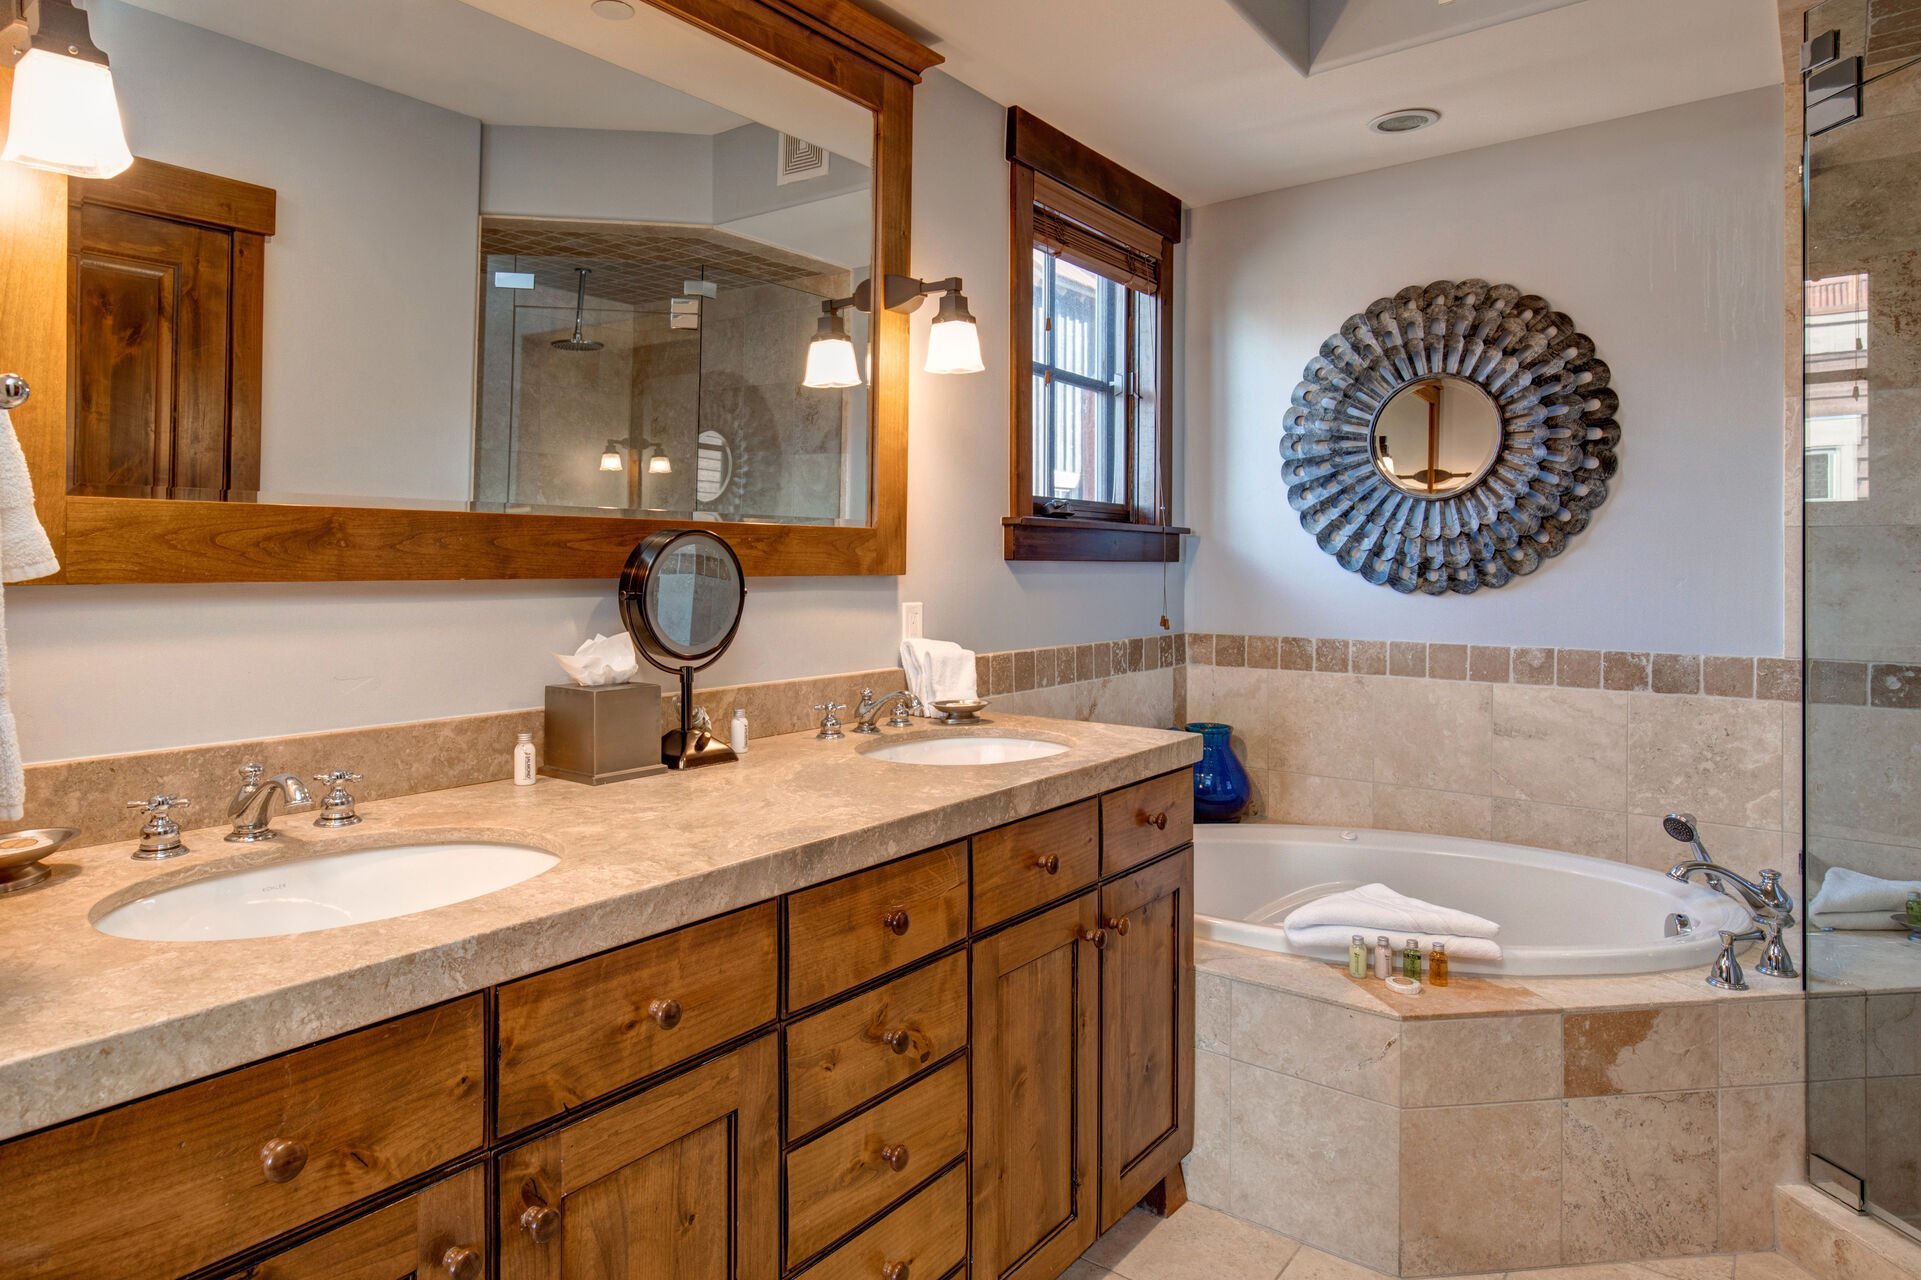 Grand Master Bath with Dual Stone Counter Sinks, Jetted Tub, Walk-in Closet and Water Closet